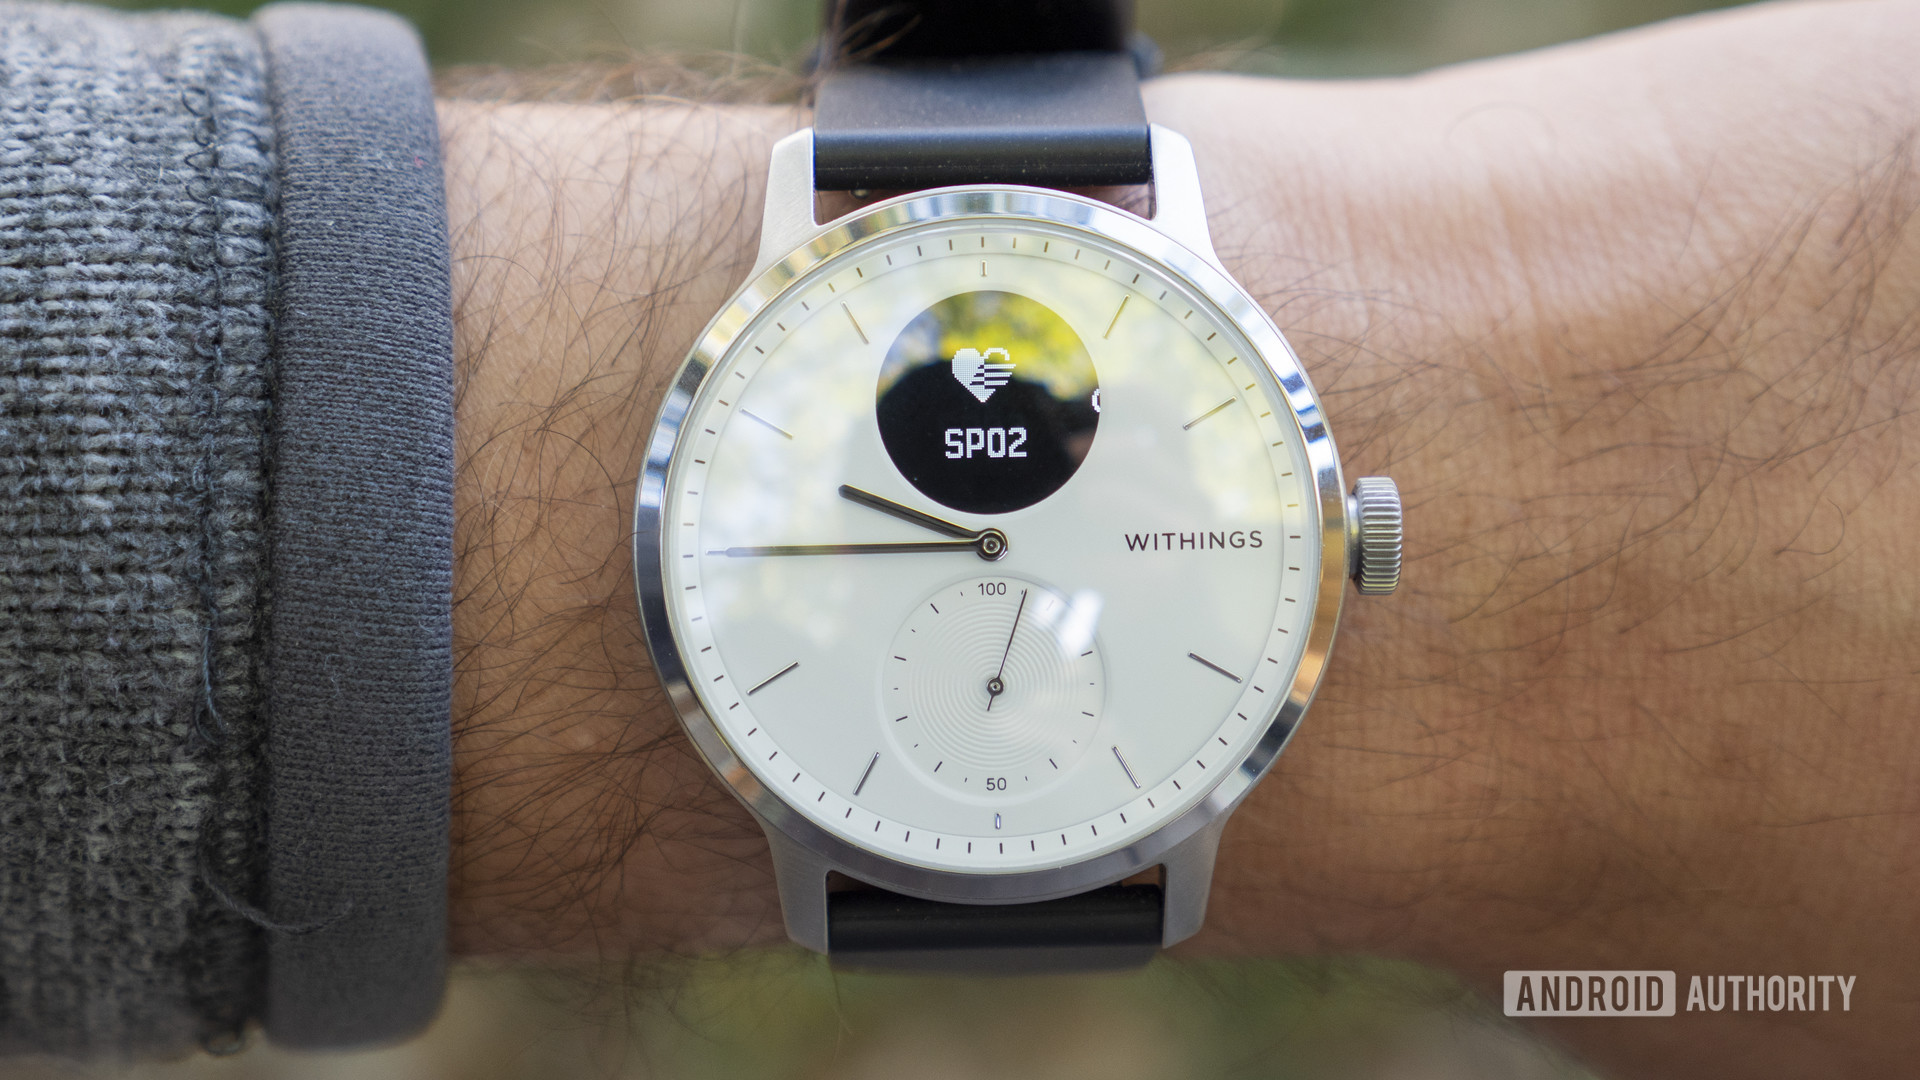 Our pick for best medical-grade sleep tracker watch, the Withings ScanWatch displays the SpO2 icon on a user's wrist.